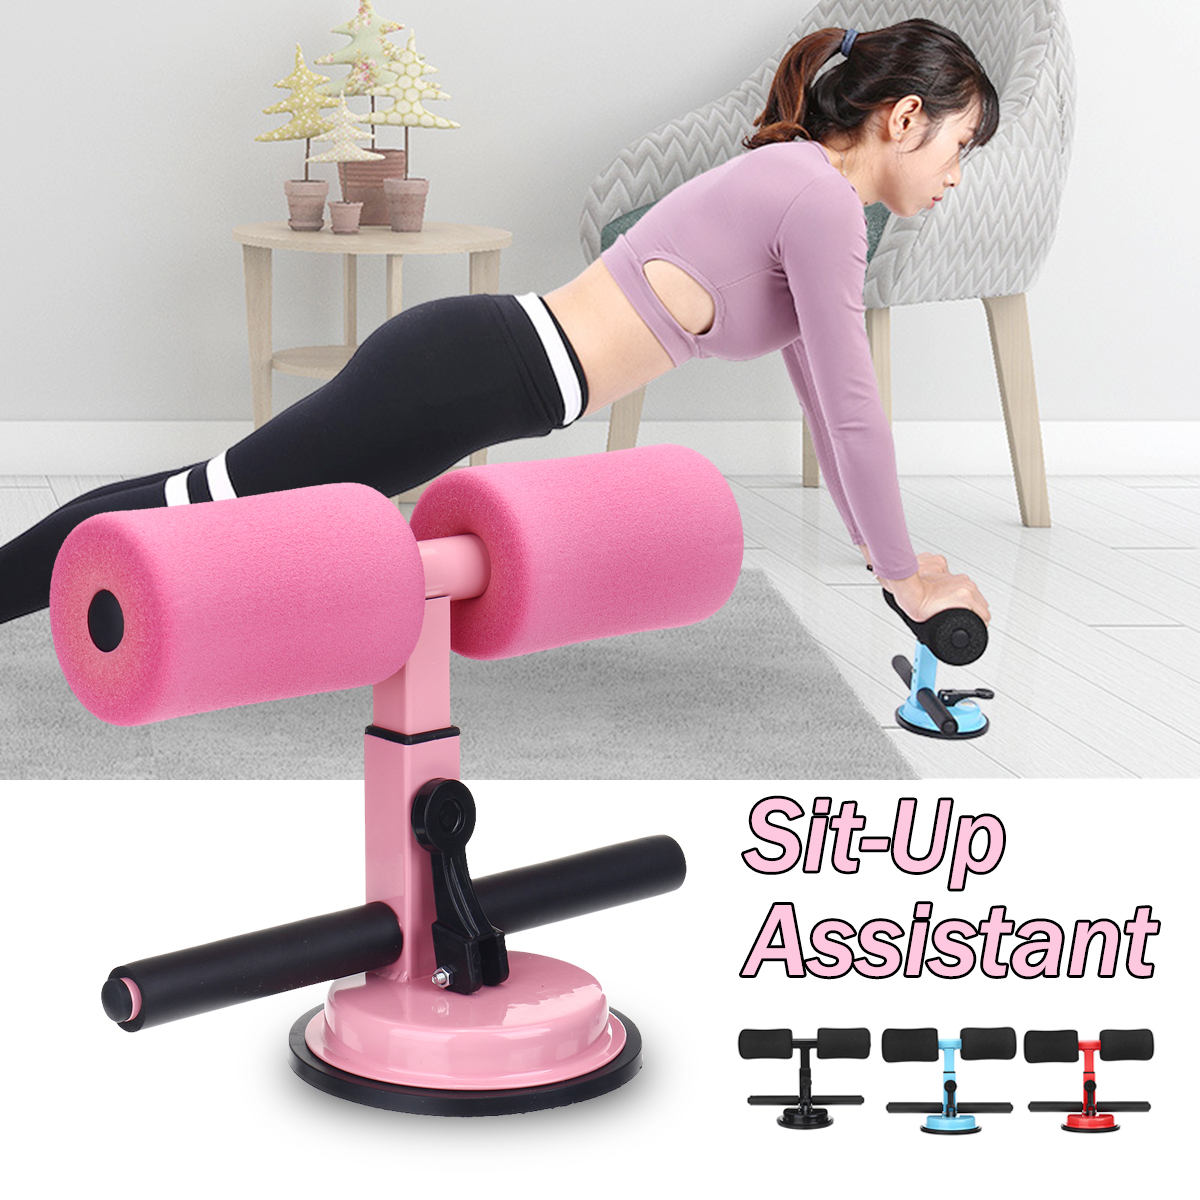 Sit-up-Assistant-Device-4-Levels-Adjustable-Self-Suction-Sit-ups-Bar-Fitness-Abdominal-Muscle-Traini-1679019-1